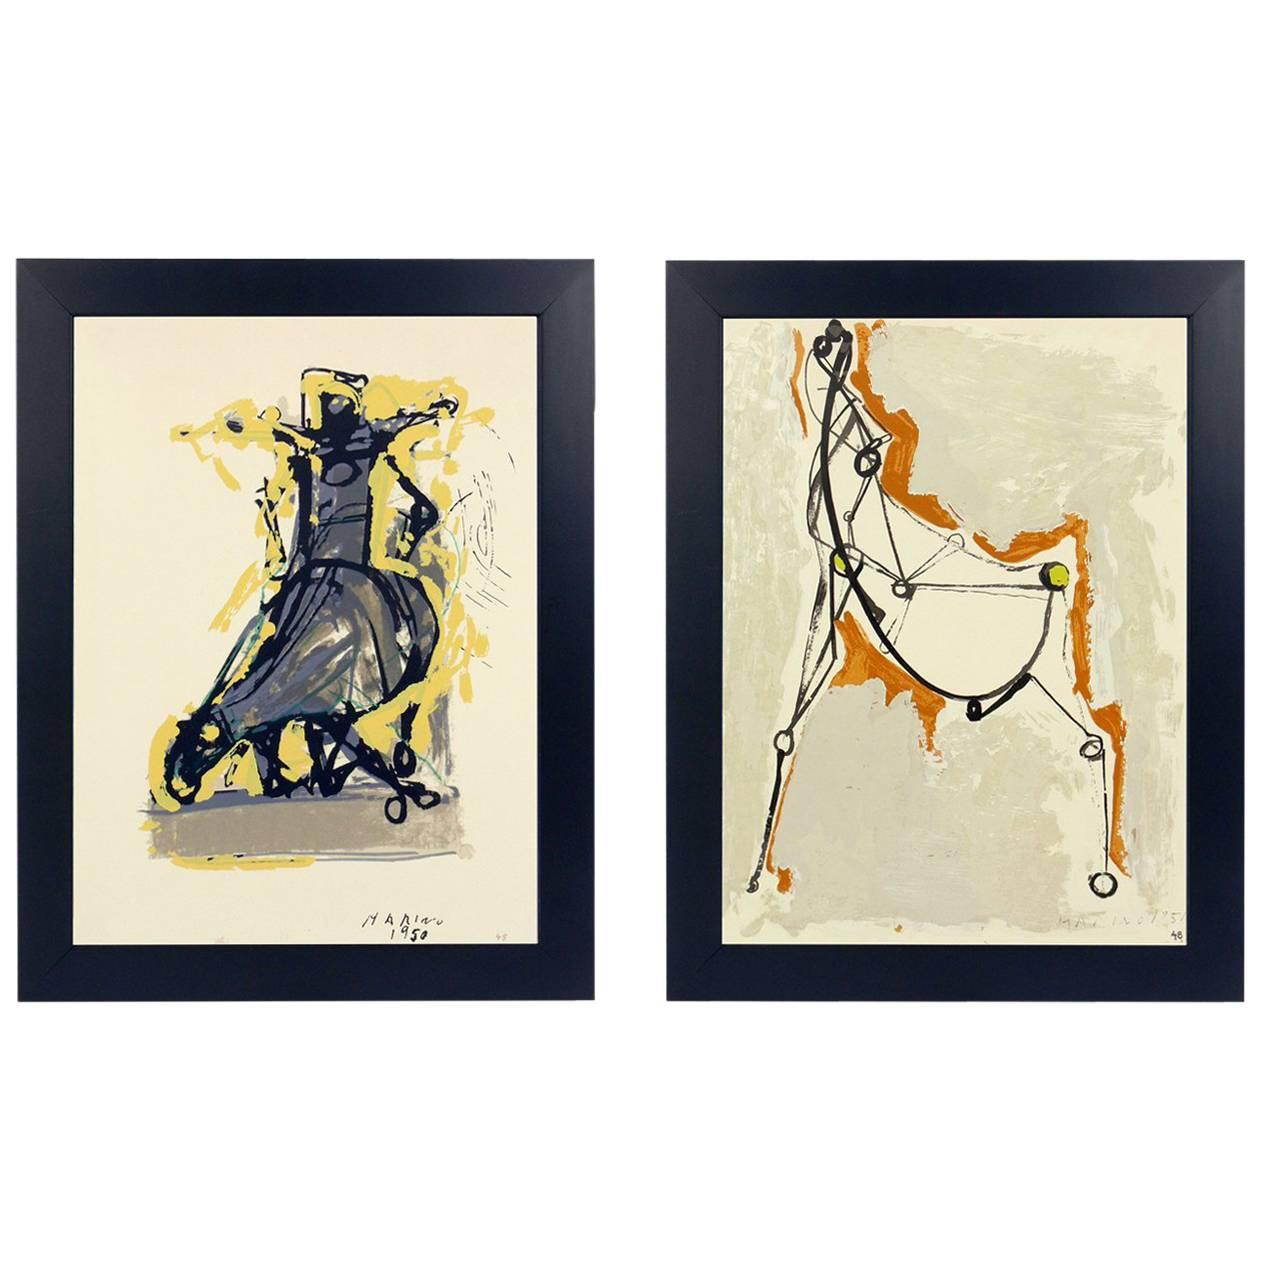 Selection of three horse and rider lithographs by Marino Marini, from the Marino Marini portfolio, printed by Carl Schunemann, Germany, circa 1968. They have been framed in clean lined black lacquer gallery frames.